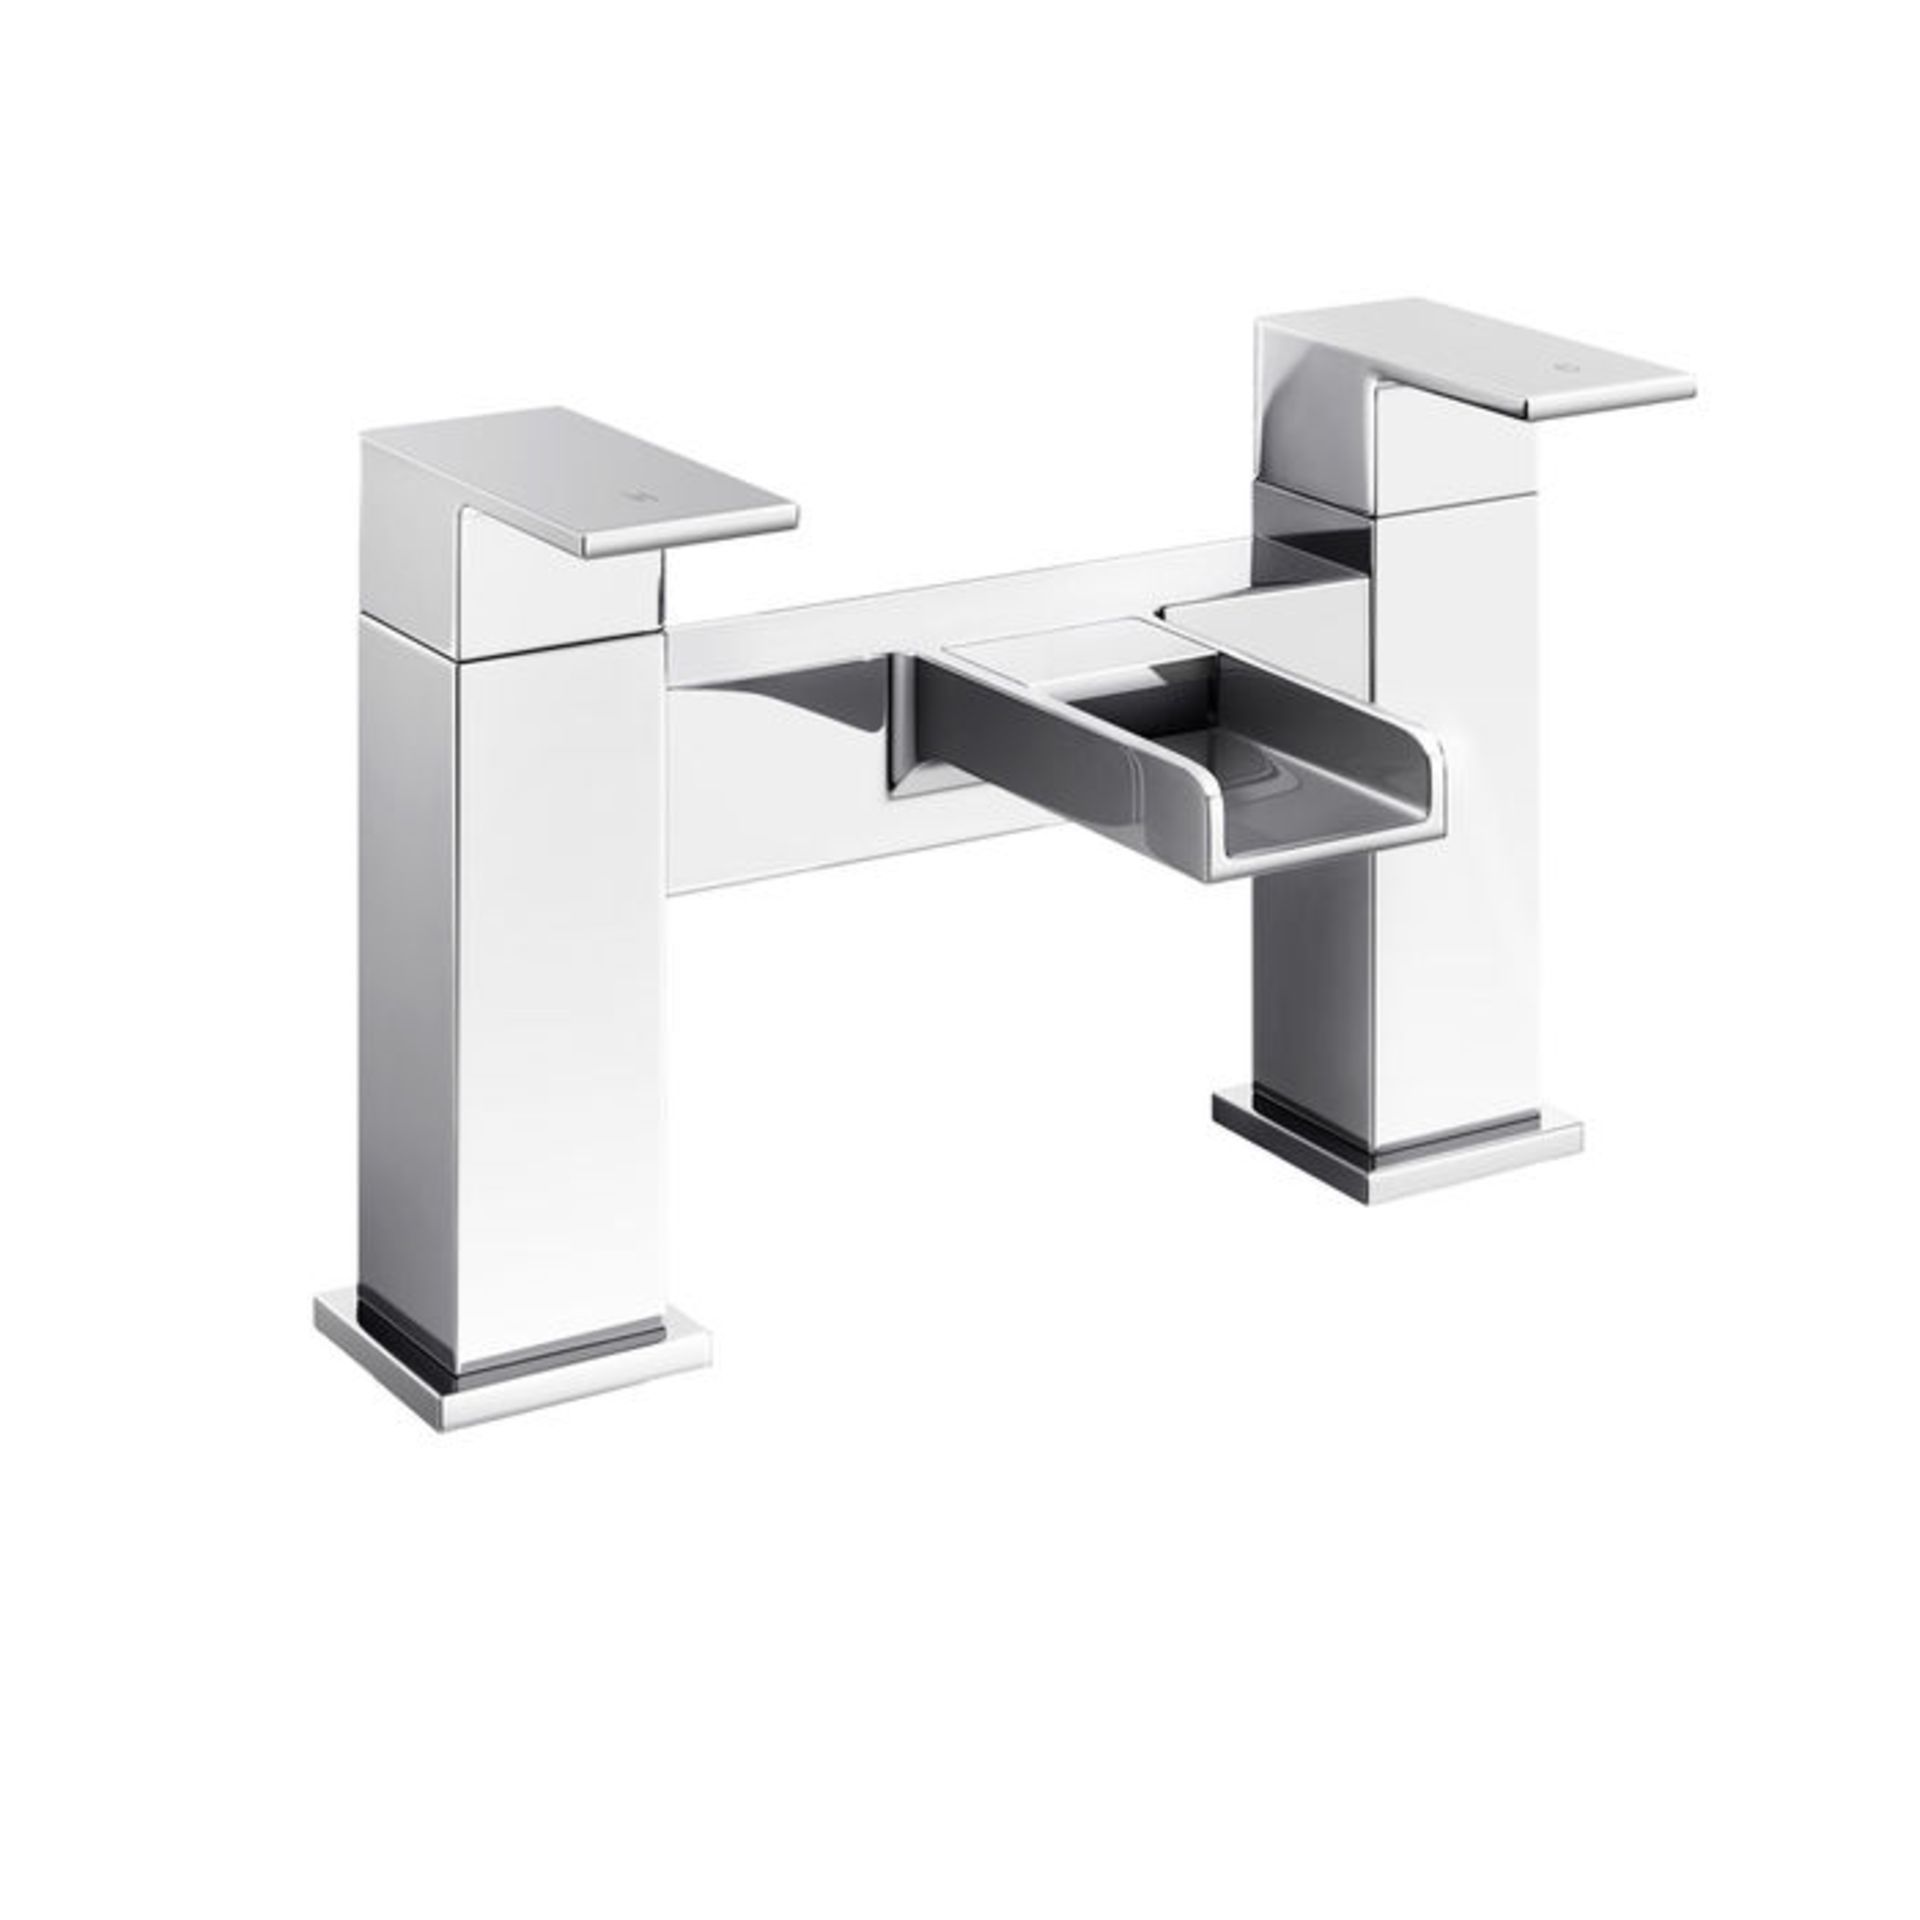 New & Boxed Niagra Waterfall Bath Mixer Taps. Tb3108.Chrome Plated Solid Brass 1/4 Turn Solid ... - Image 2 of 3